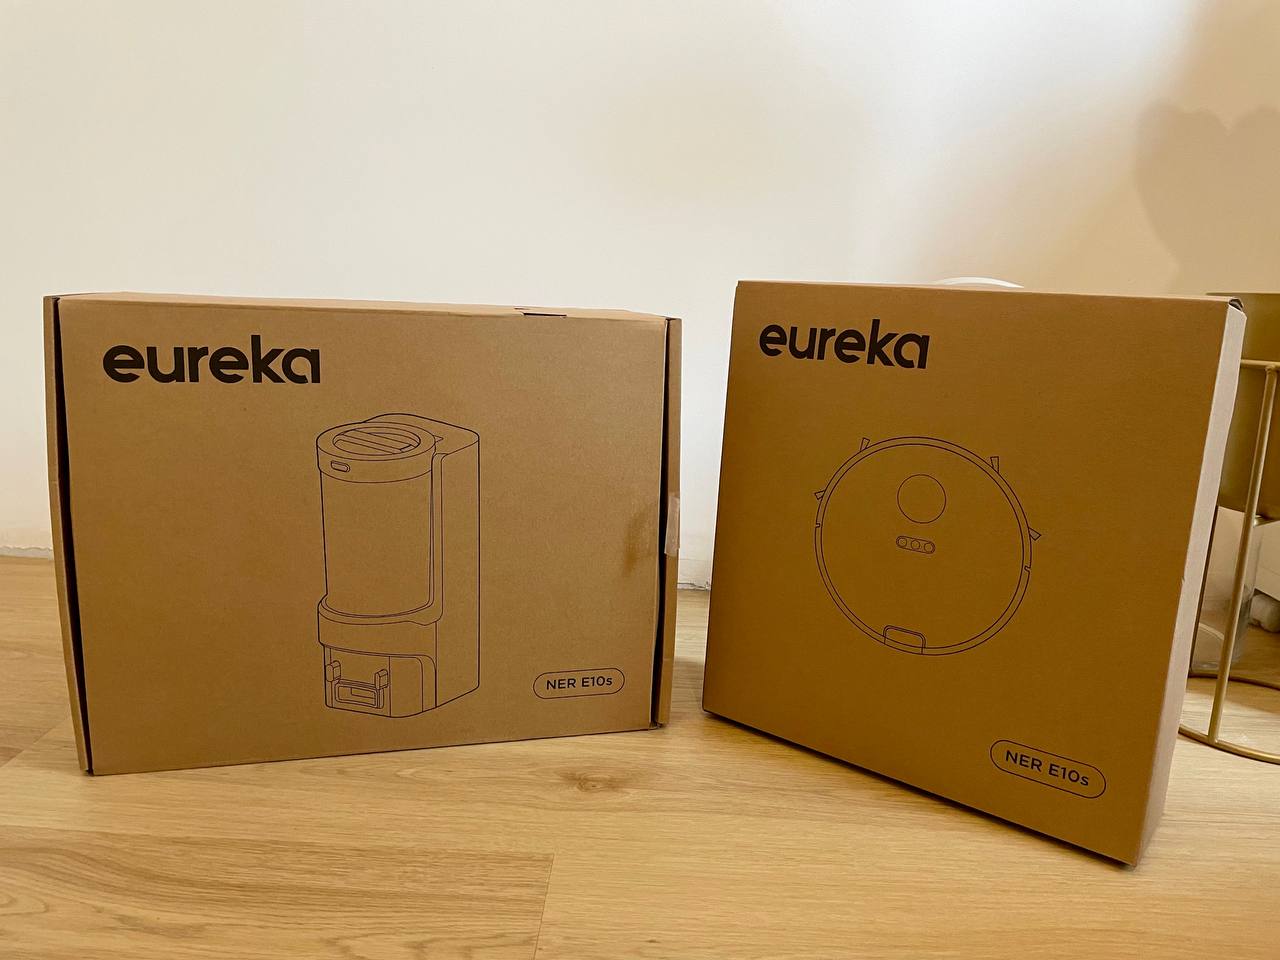 Eureka E10s review: a new concept of robot vacuum cleaner